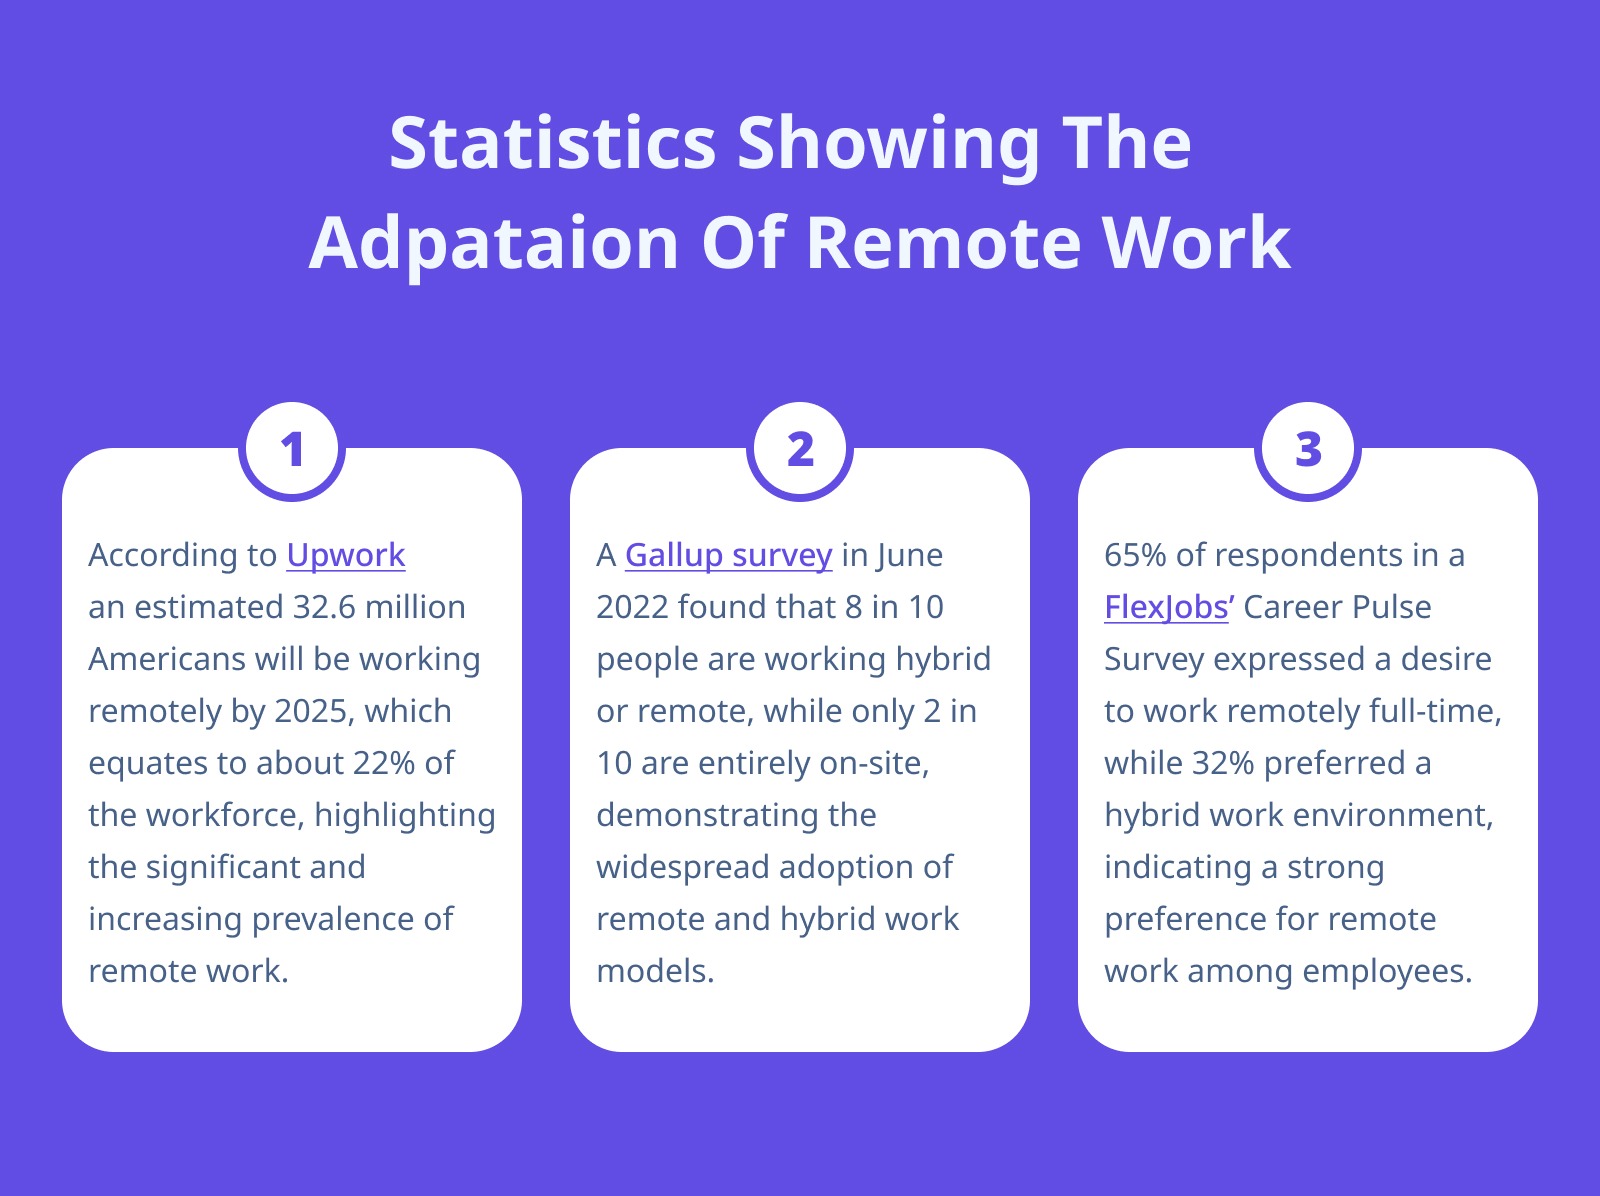 Statistics Showing The Adpataion of Remote Work